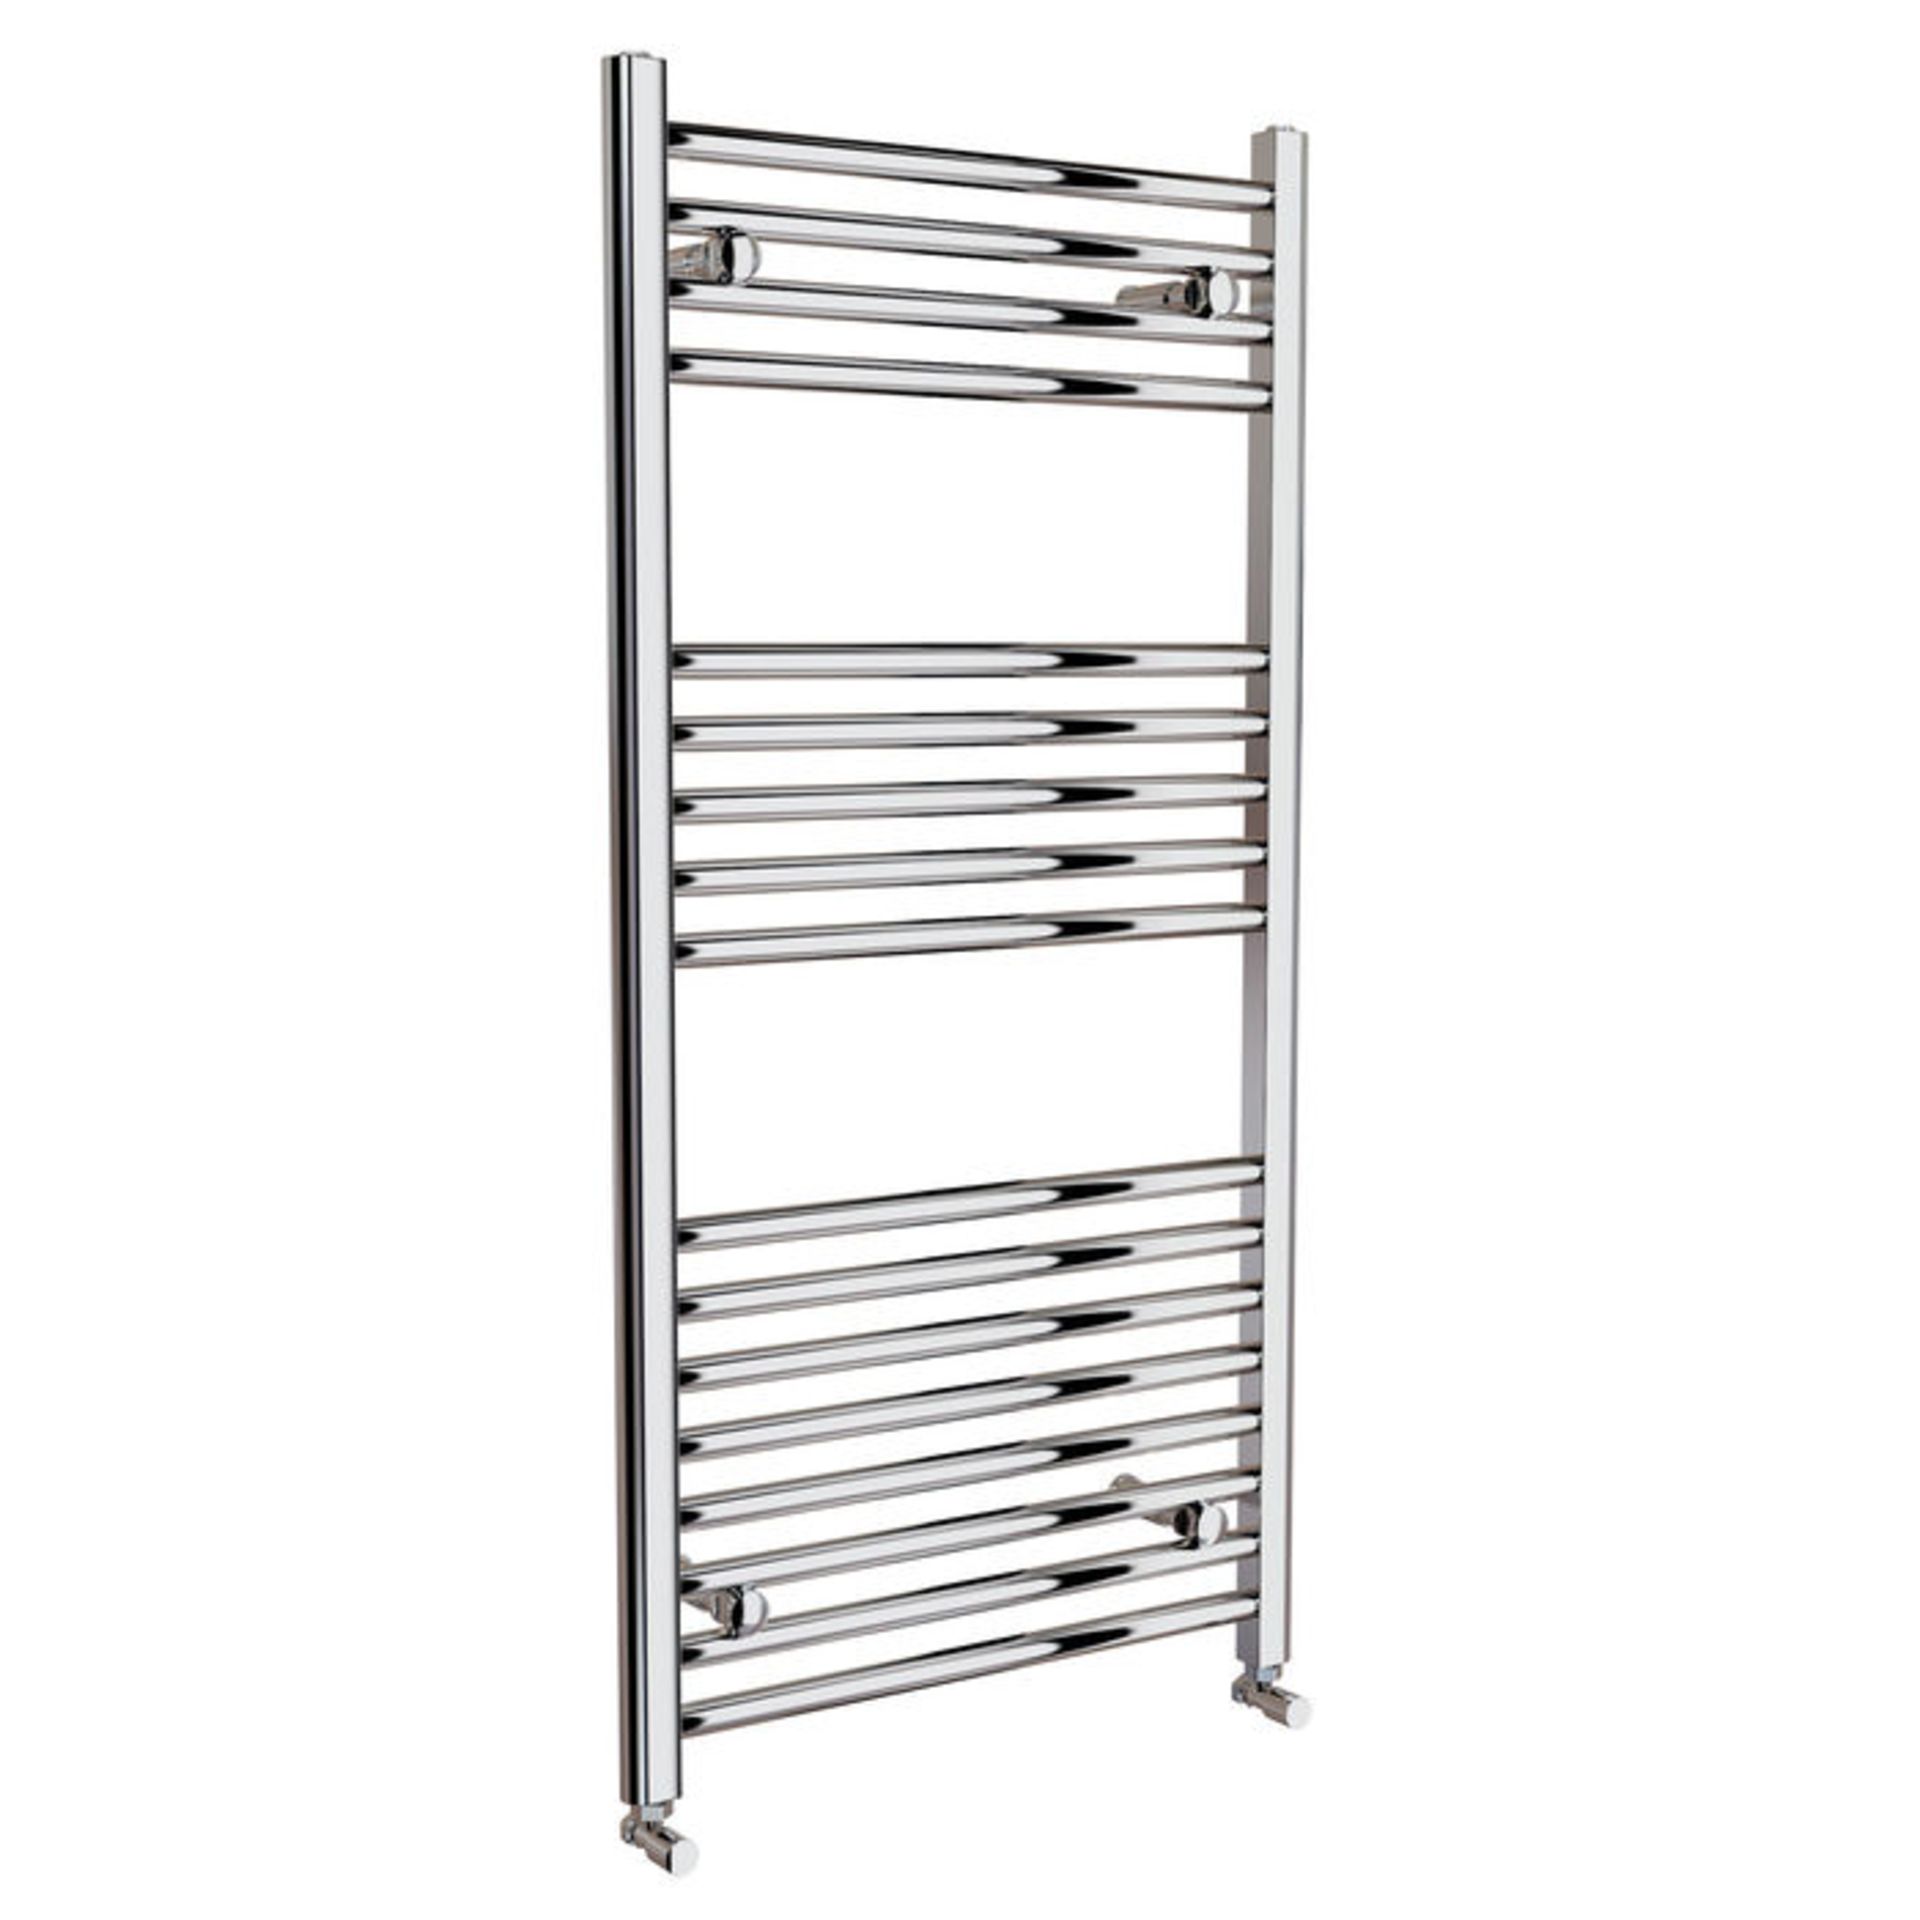 (JM46) 1200x600mm - 20mm Tubes - Chrome Heated Straight Rail Ladder Towel Radiator. Made from chrome - Image 3 of 3